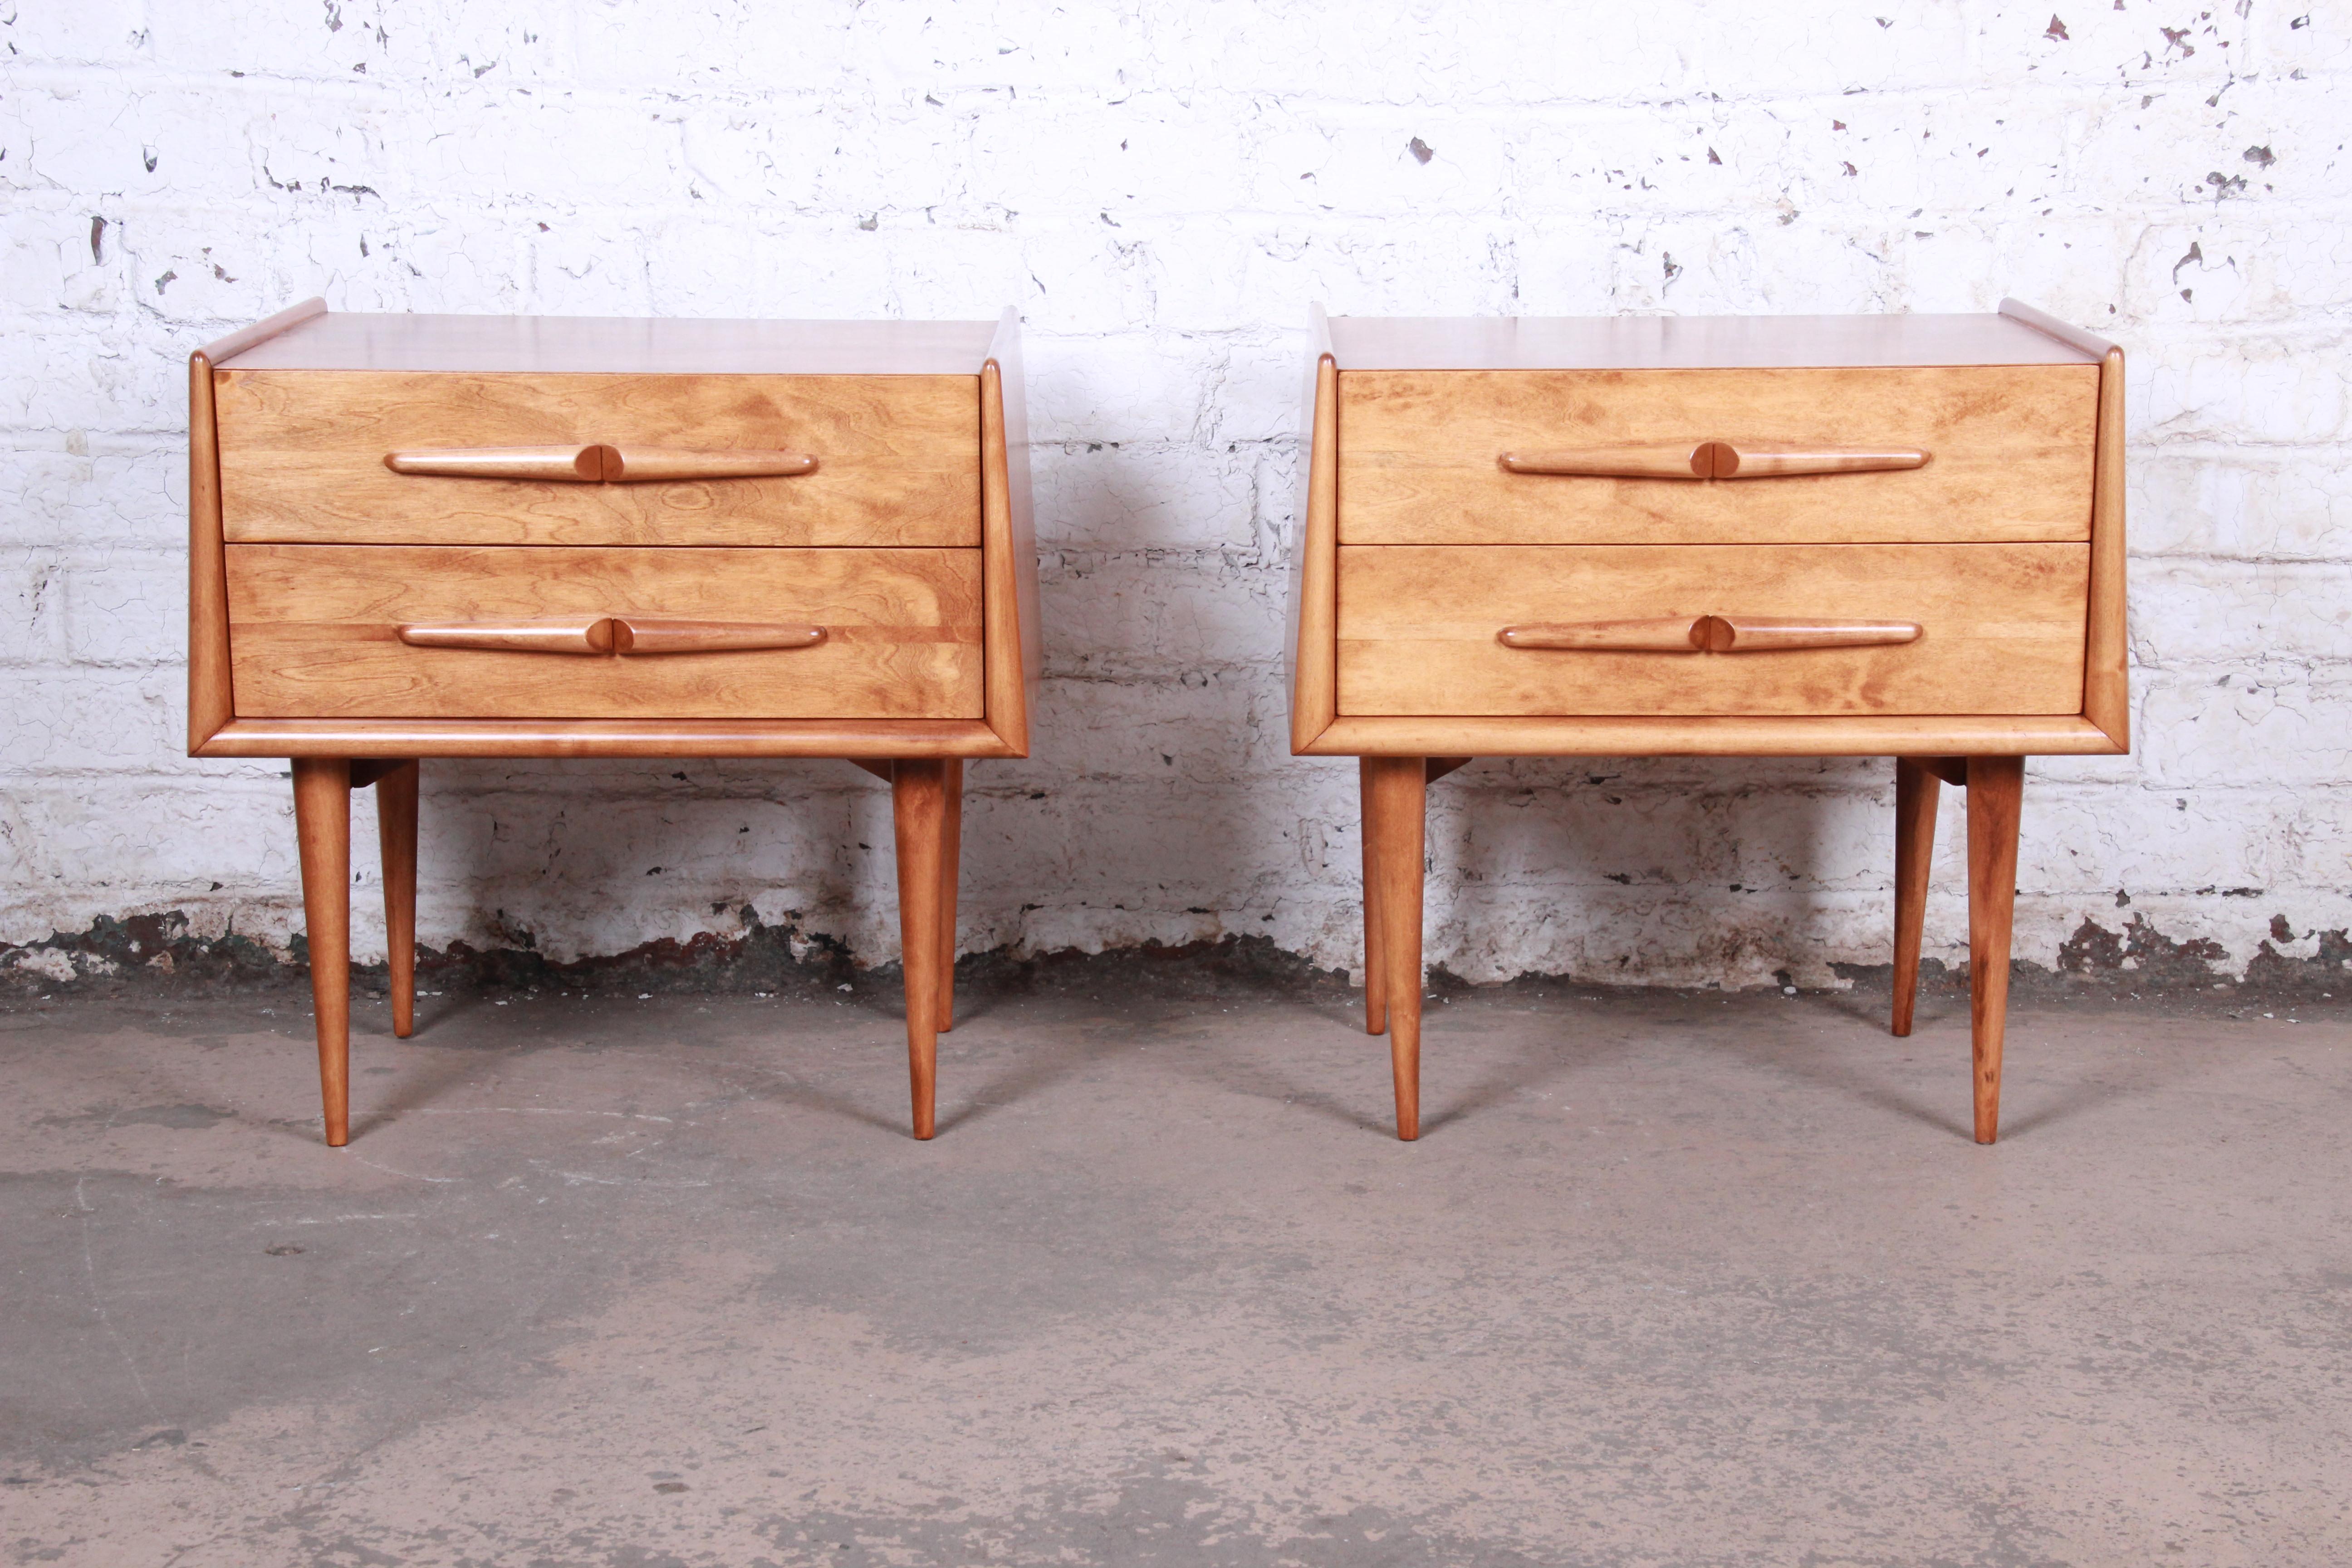 An exceptional pair of midcentury Swedish Modern birch nightstands

Designed by Edmond Spence

Sweden, 1950s

Measures: 24.38